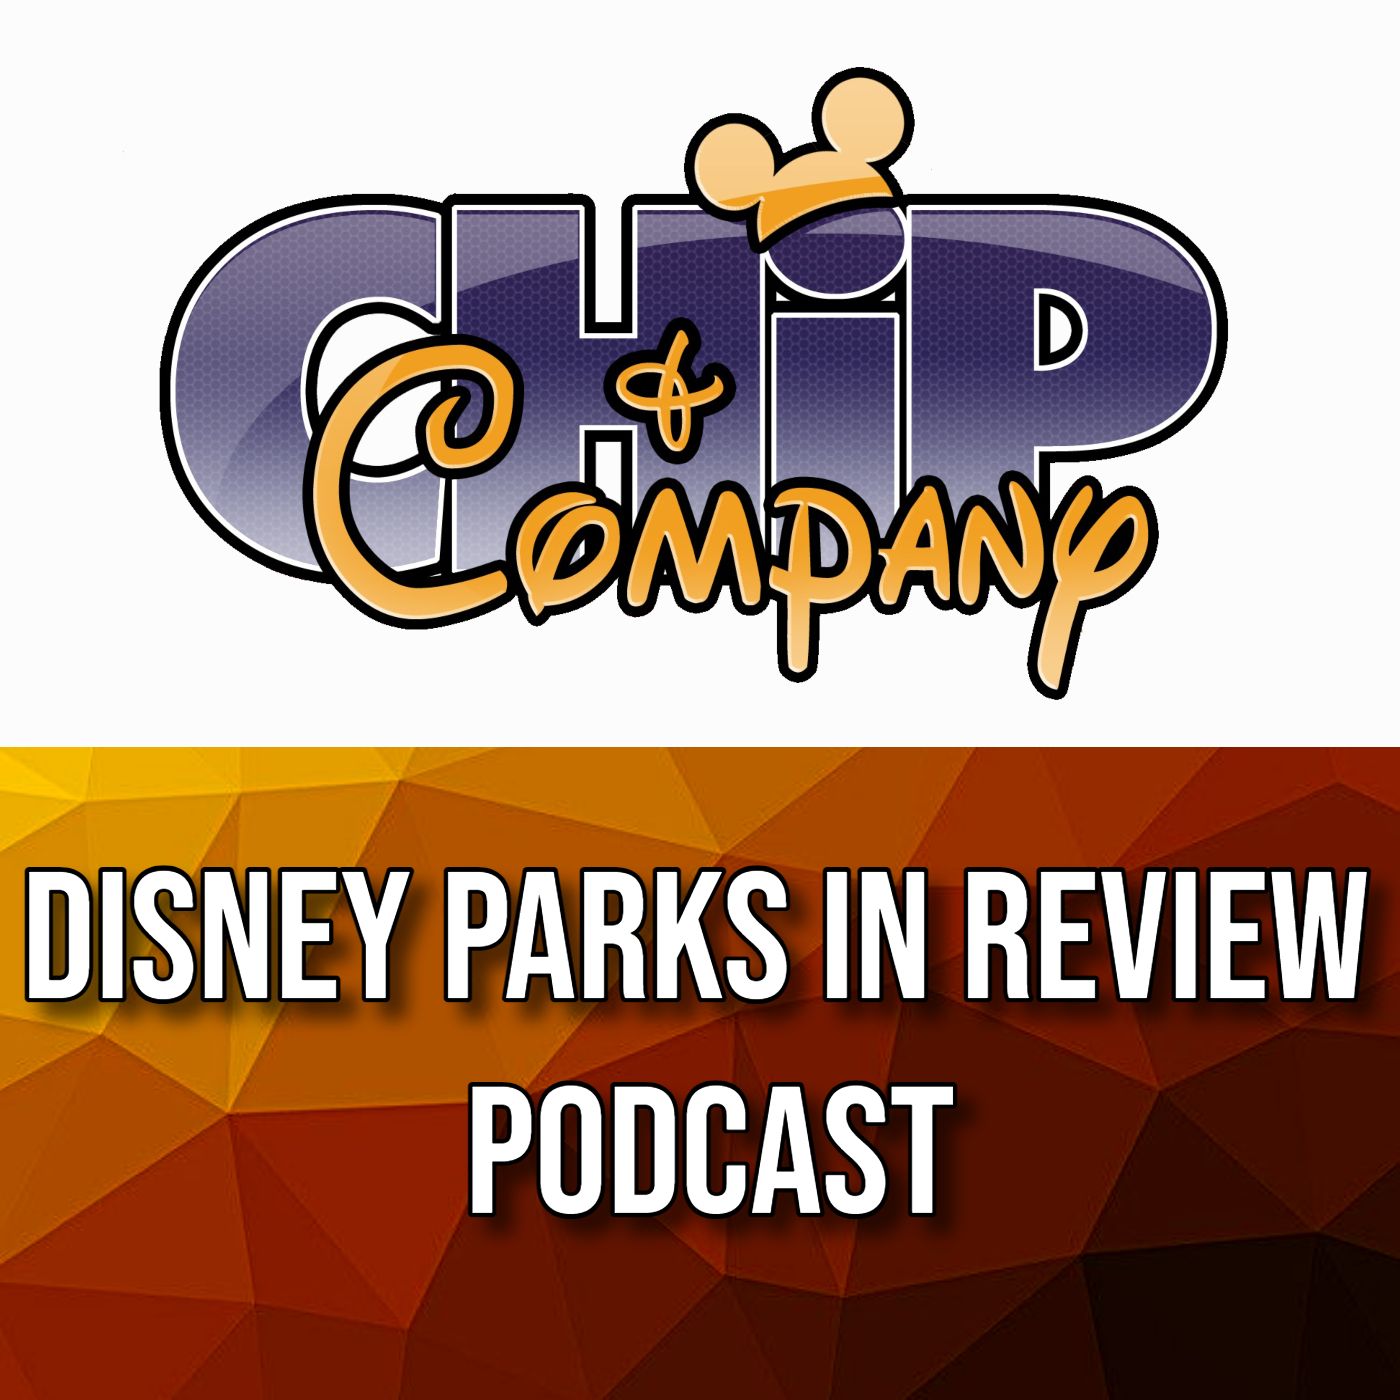 Disney Parks in Review - New Finding Nemo Show, Raspberry Orchid Merch and More Image